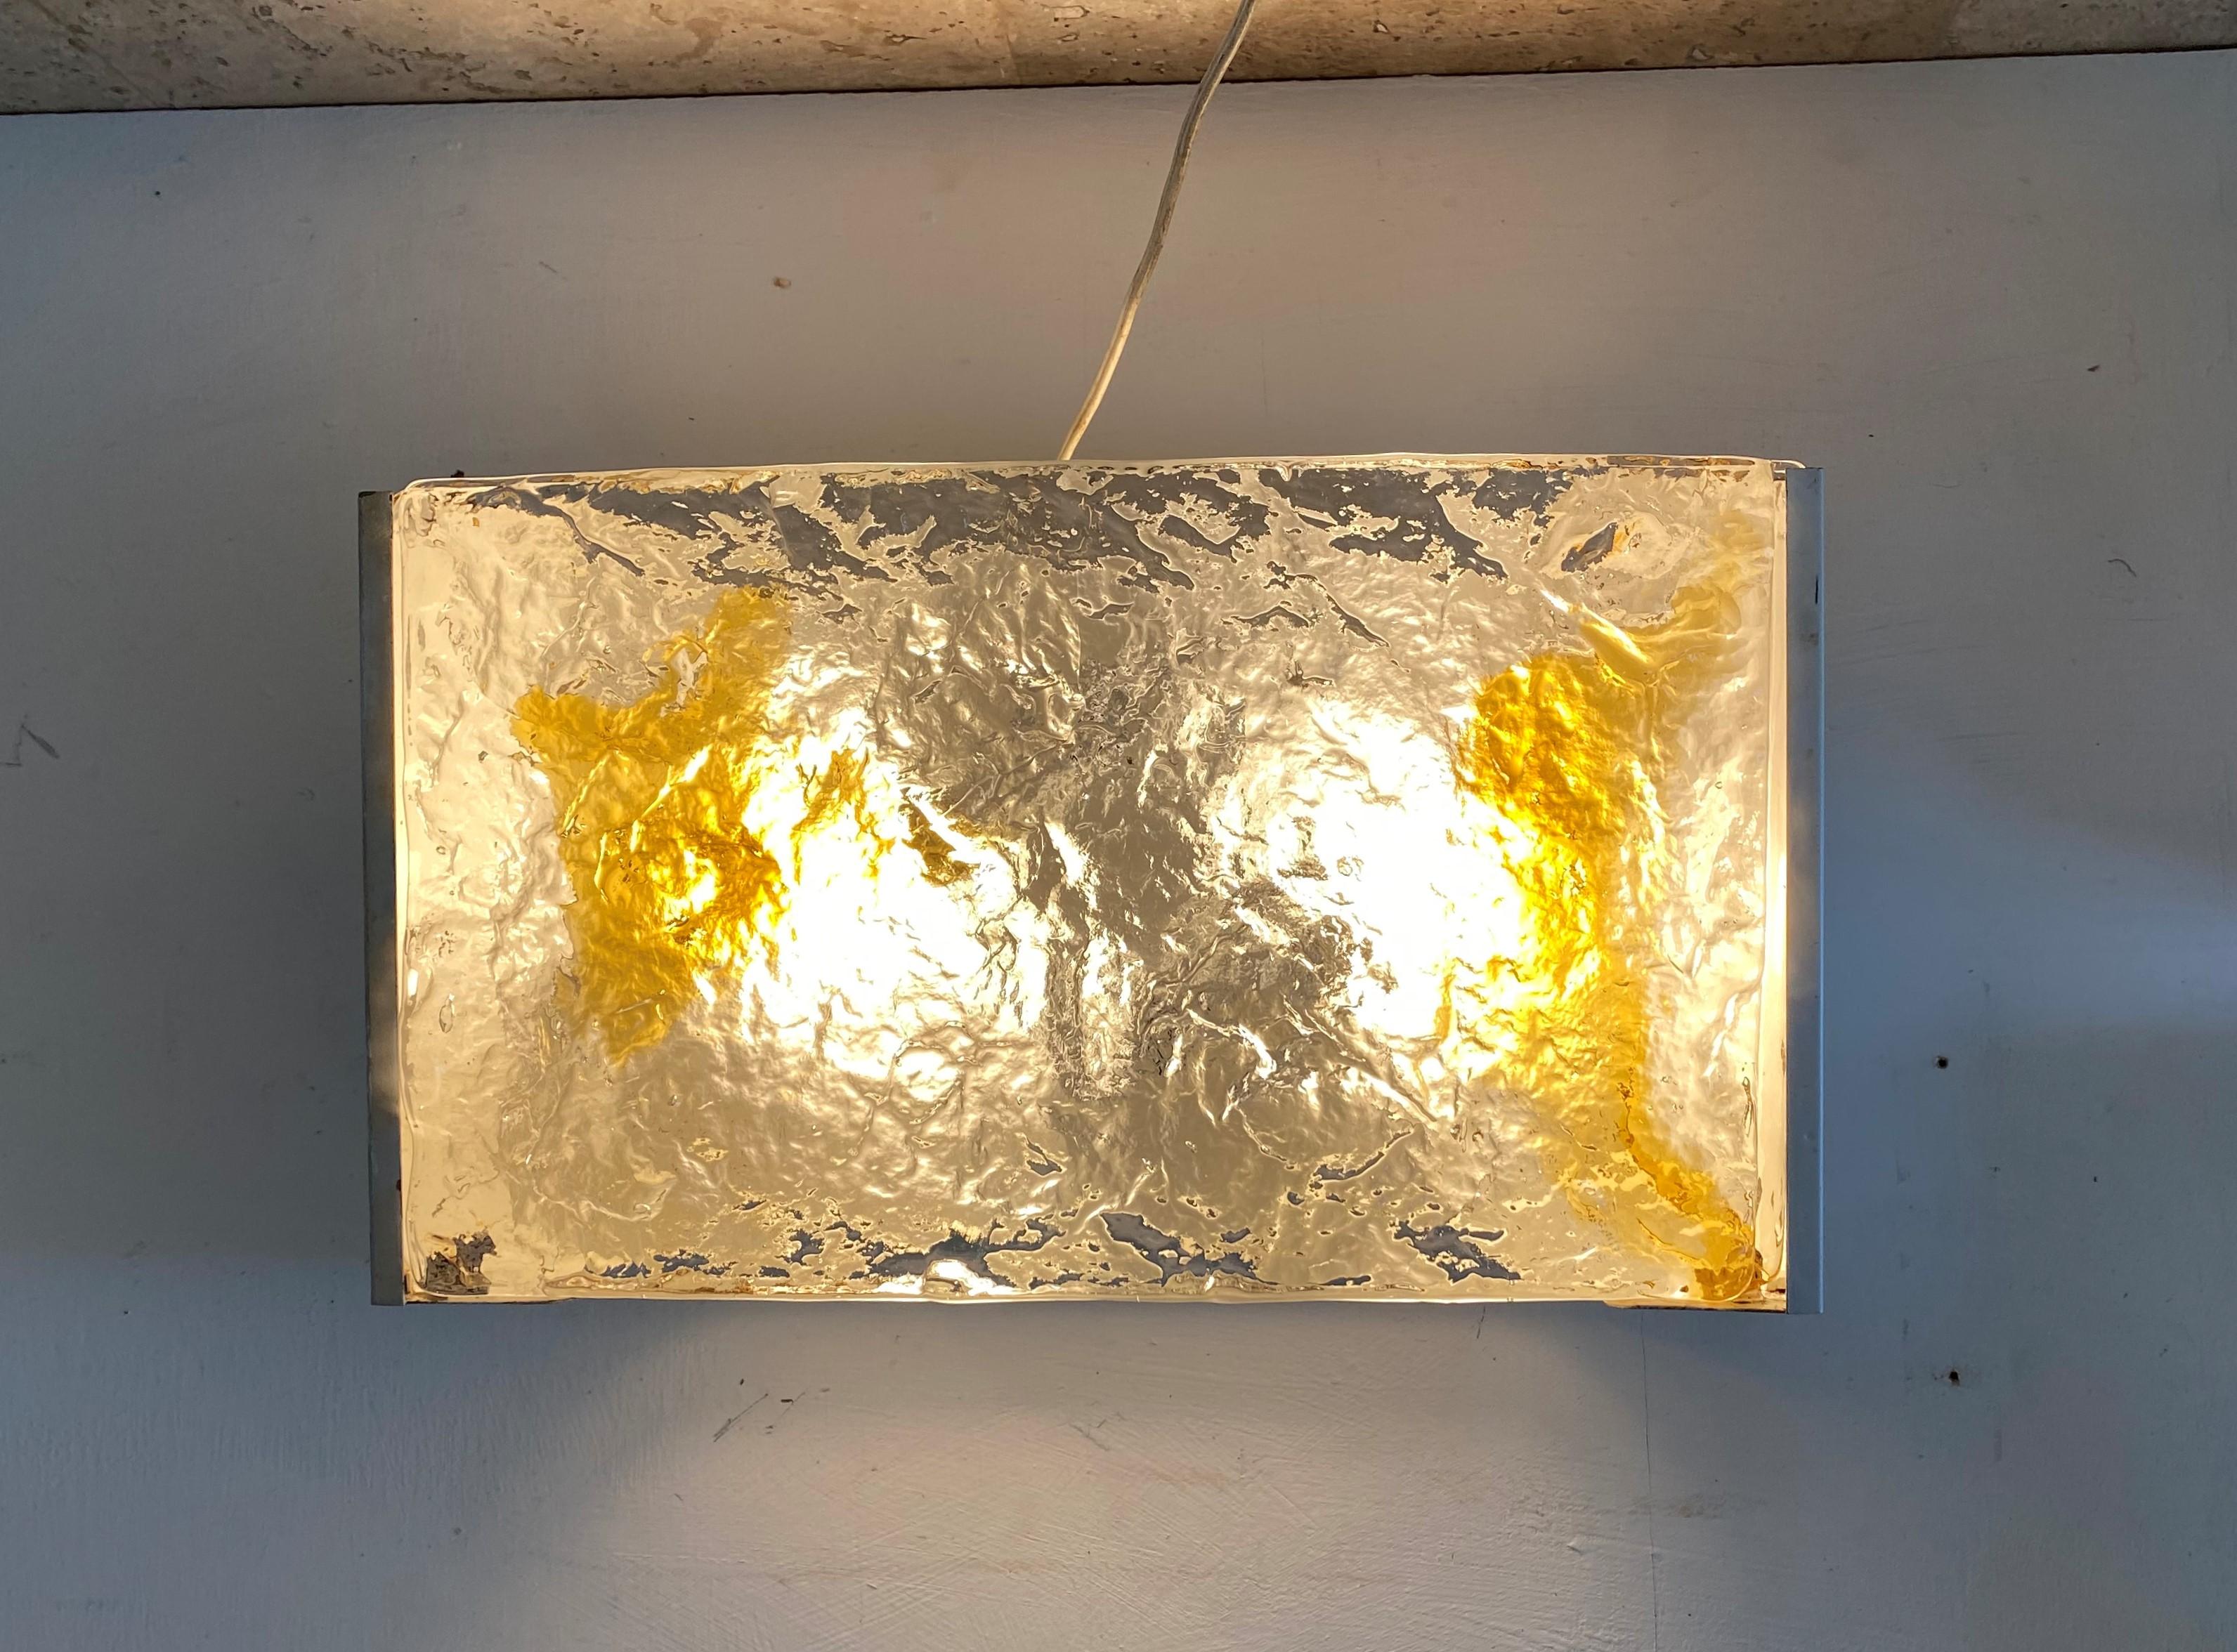 5 Mid-Century Modern Murano glass sconces manufctured by Venini, circa 1960, in clear and amber thick Murano glass slabs.
Metal hardware lacquered white.
Priced individually.